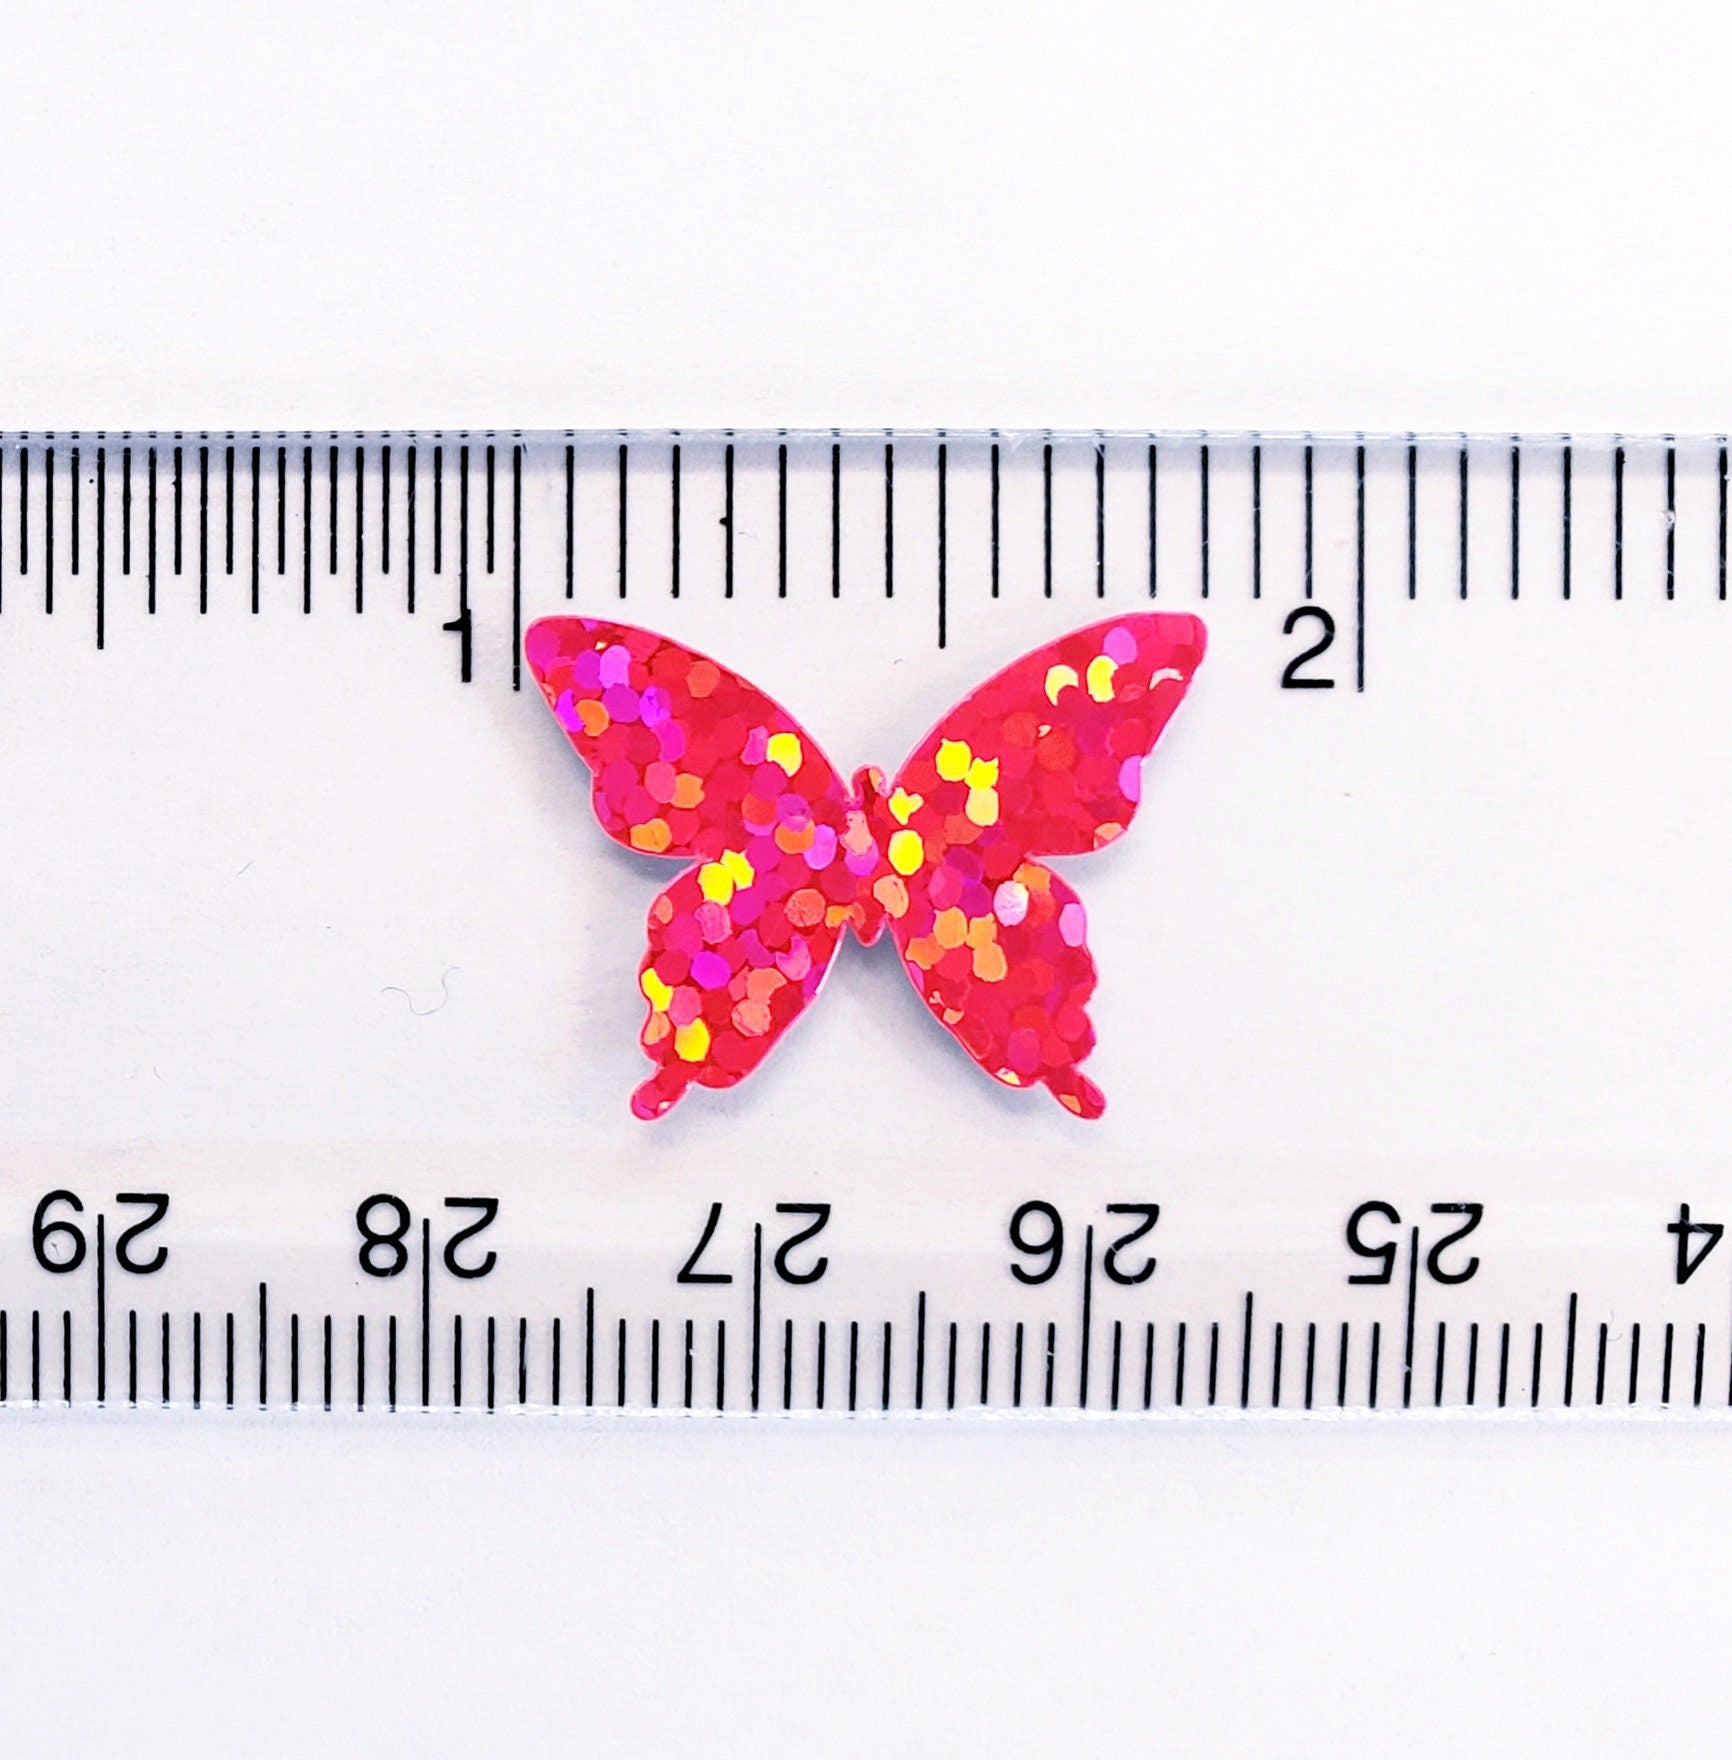 Pink Butterfly Stickers, set of 25, 50, 100 or 200 holo deco butterflies for toploader sleeves, envelopes, laptops, crafts and journals.